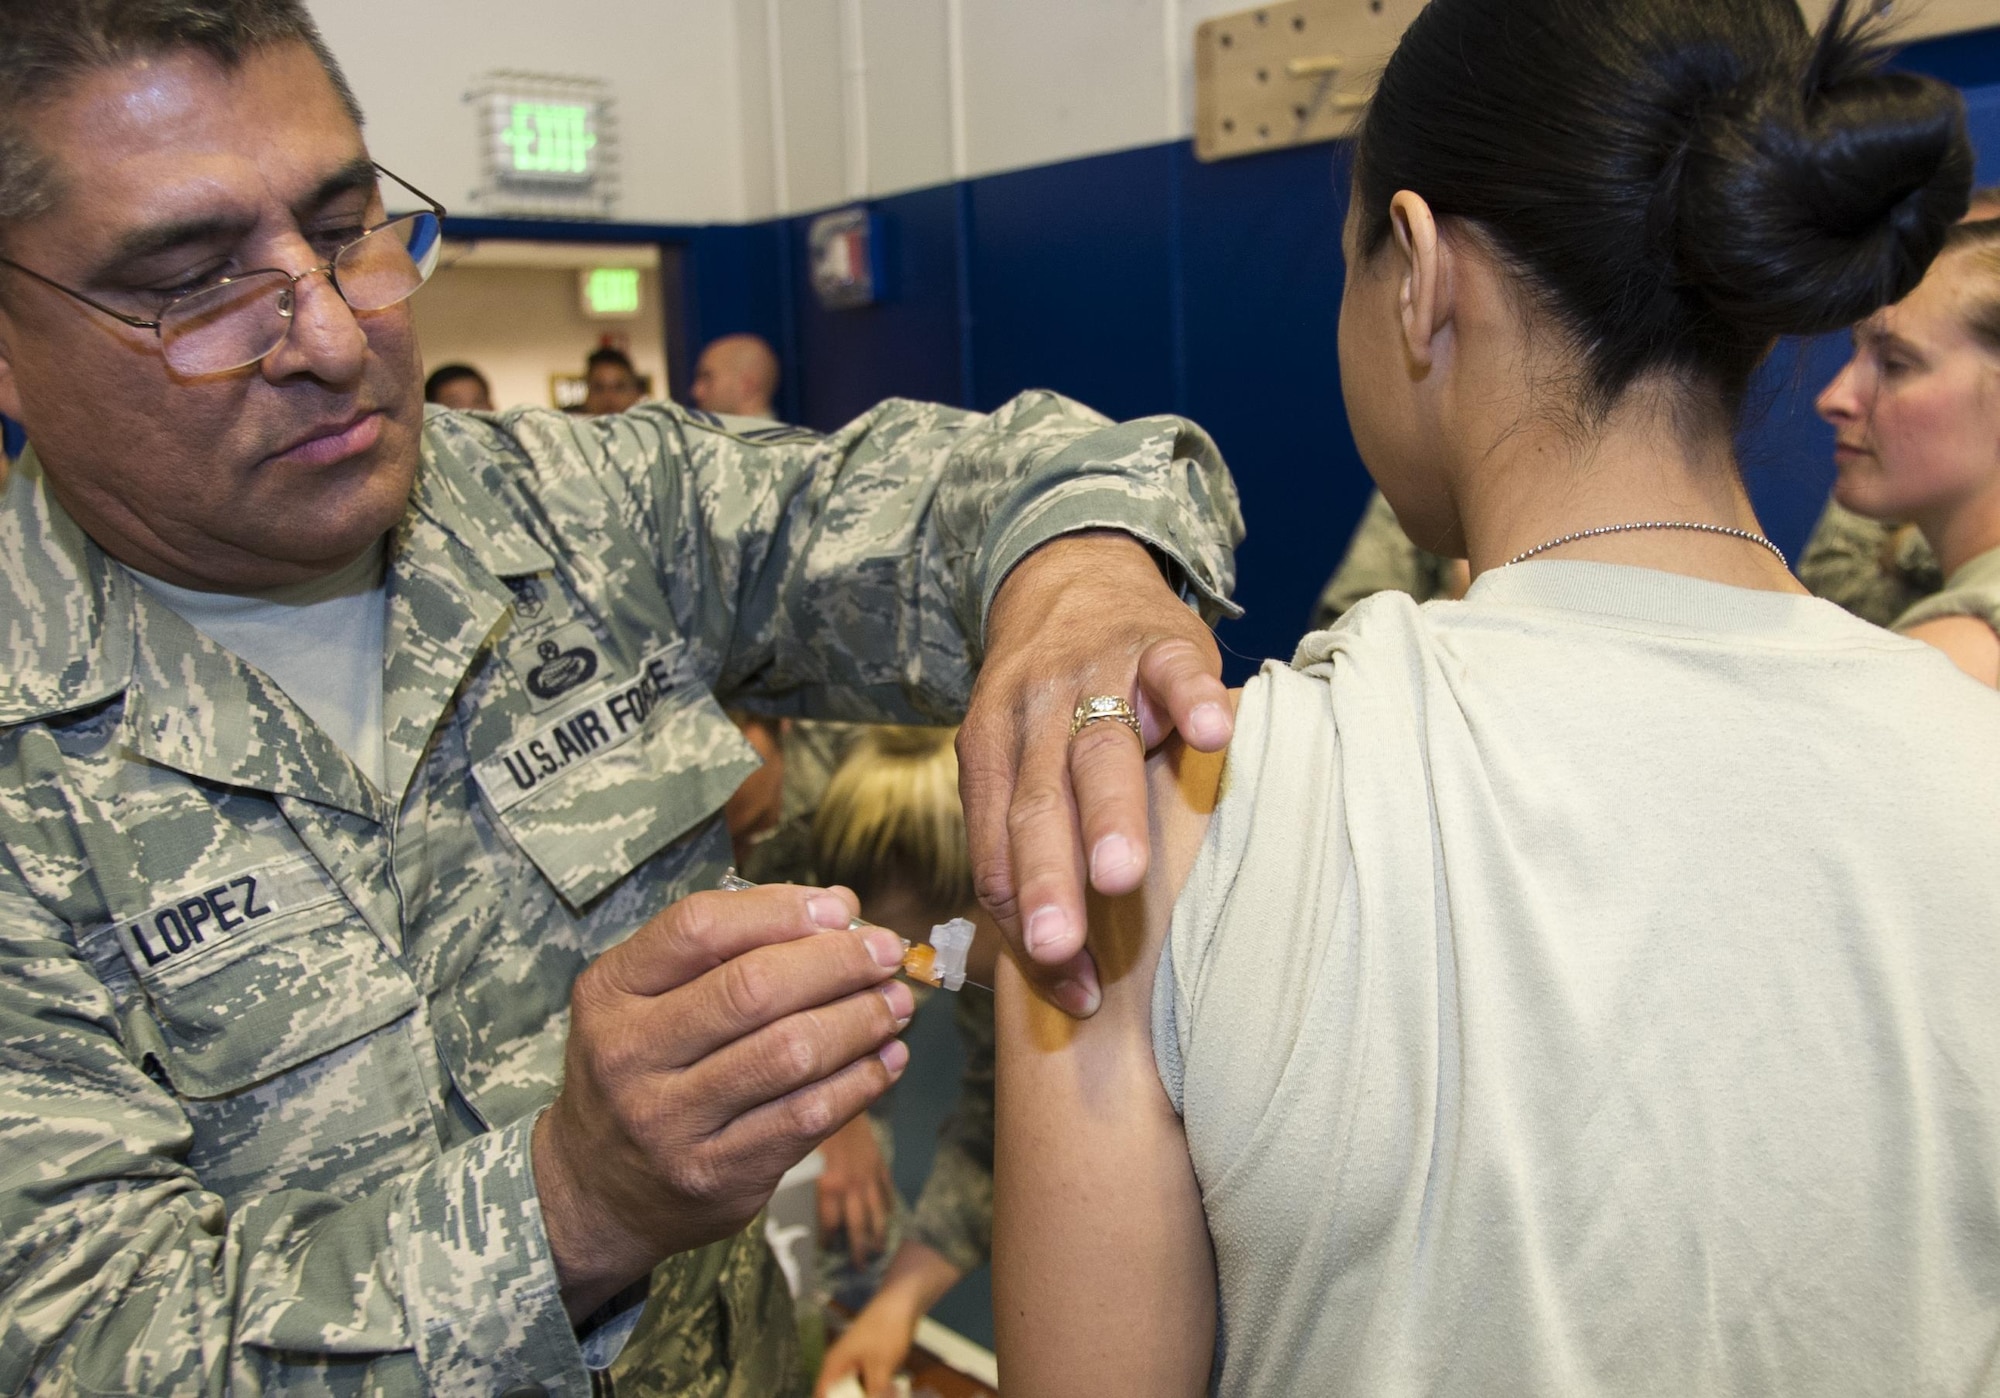 Senior Master Sgt. Esteban Lopez, 310th Aerospace Medicine Flight, administers the flu shot to Staff Sgt. Monica Arana, 310th Force Support Squadron, at the 310th Space Wing's commander's call on Sunday, Nov. 5, 2017.